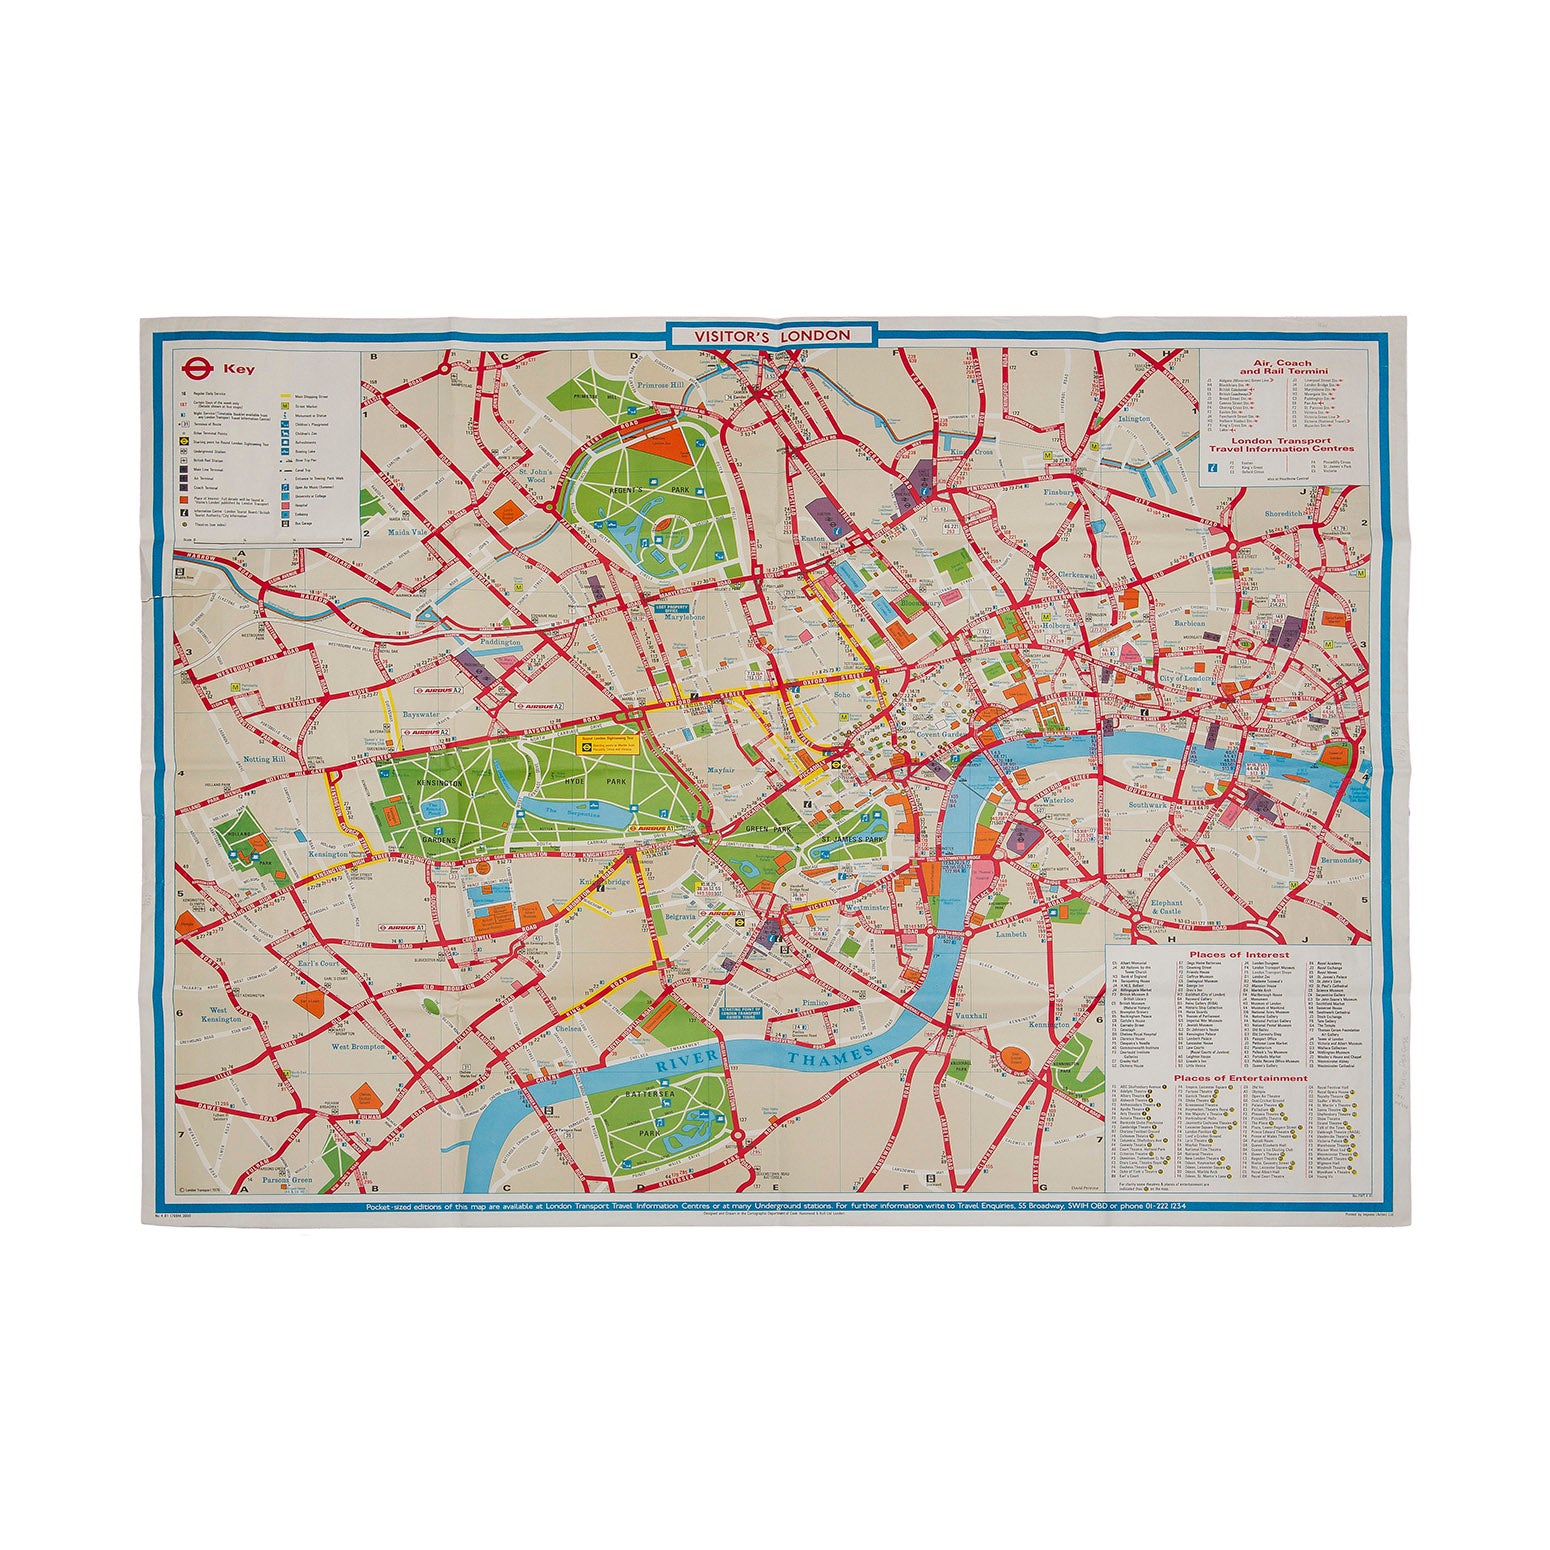 Original central London transport poster map, designed by Cook, Hammond & Kell Ltd and first published by London Transport in 1976.